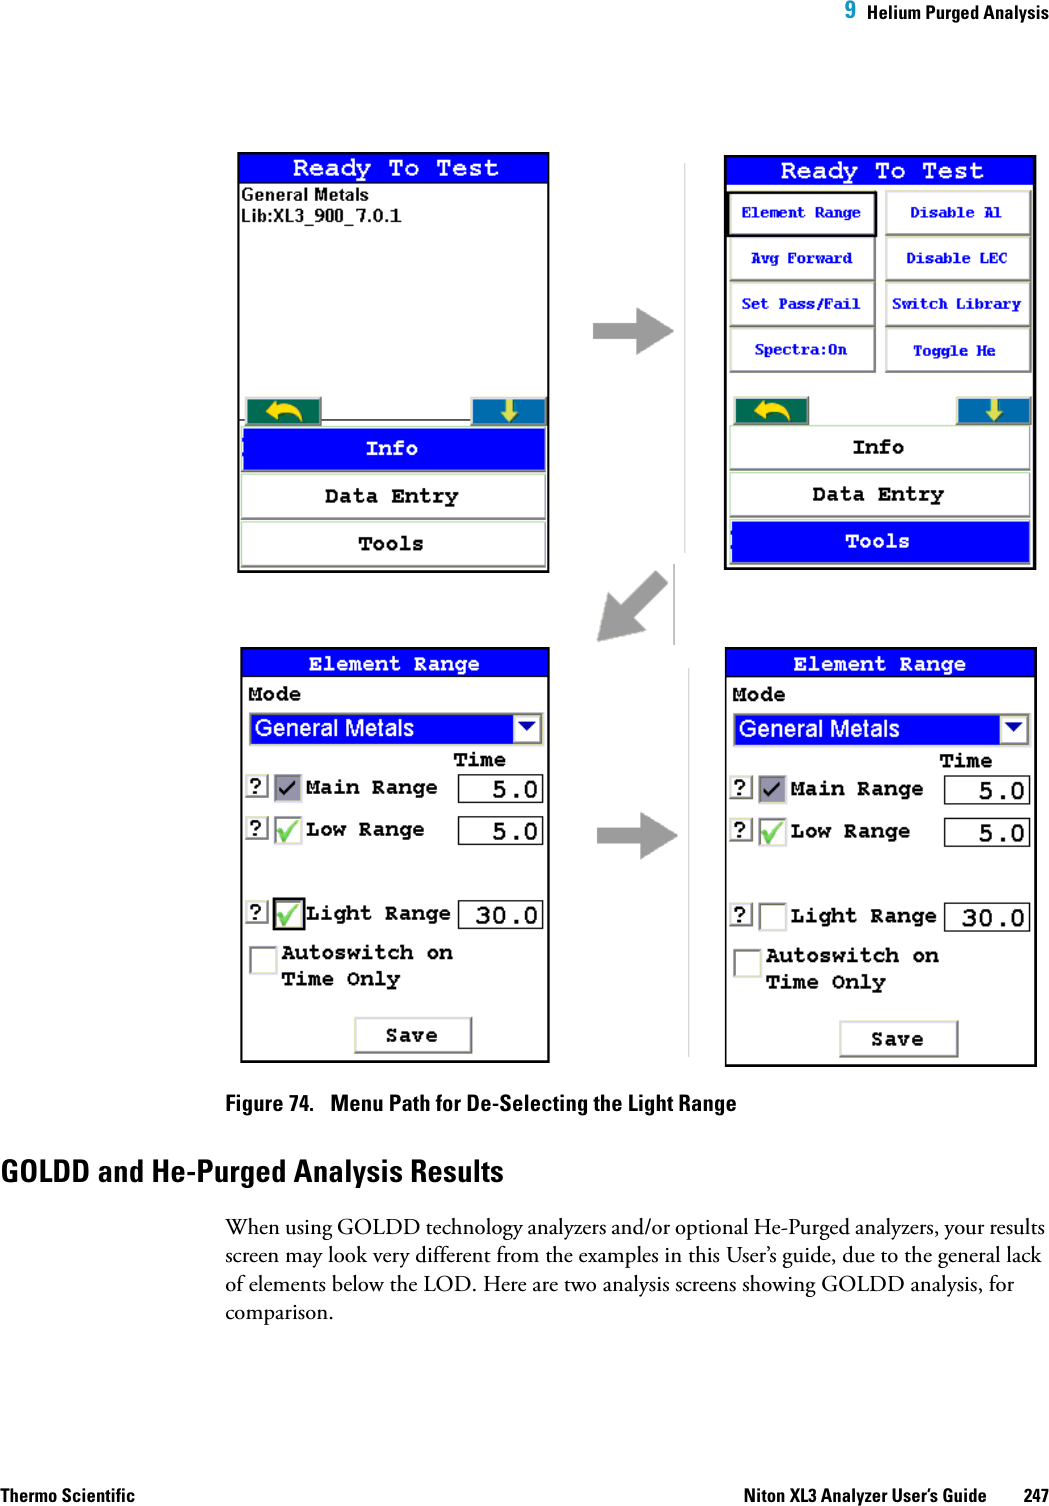  9  Helium Purged AnalysisThermo Scientific Niton XL3 Analyzer User’s Guide 247Figure 74.  Menu Path for De-Selecting the Light RangeGOLDD and He-Purged Analysis ResultsWhen using GOLDD technology analyzers and/or optional He-Purged analyzers, your results screen may look very different from the examples in this User’s guide, due to the general lack of elements below the LOD. Here are two analysis screens showing GOLDD analysis, for comparison.